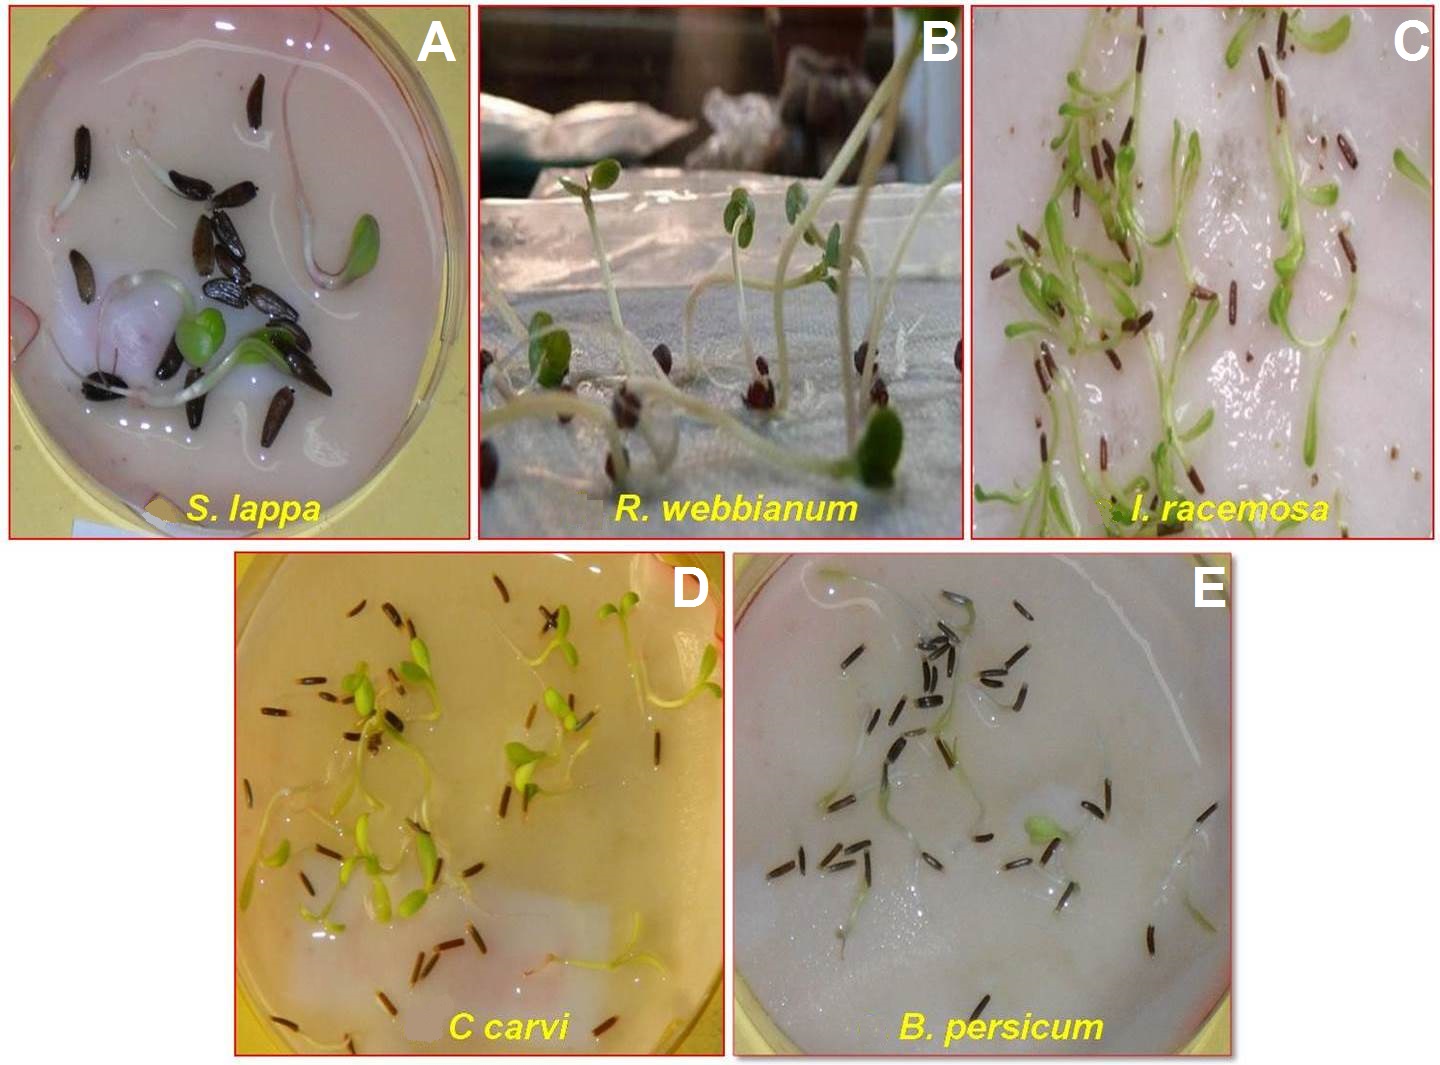 Seed germination of some selected medicinal plants.